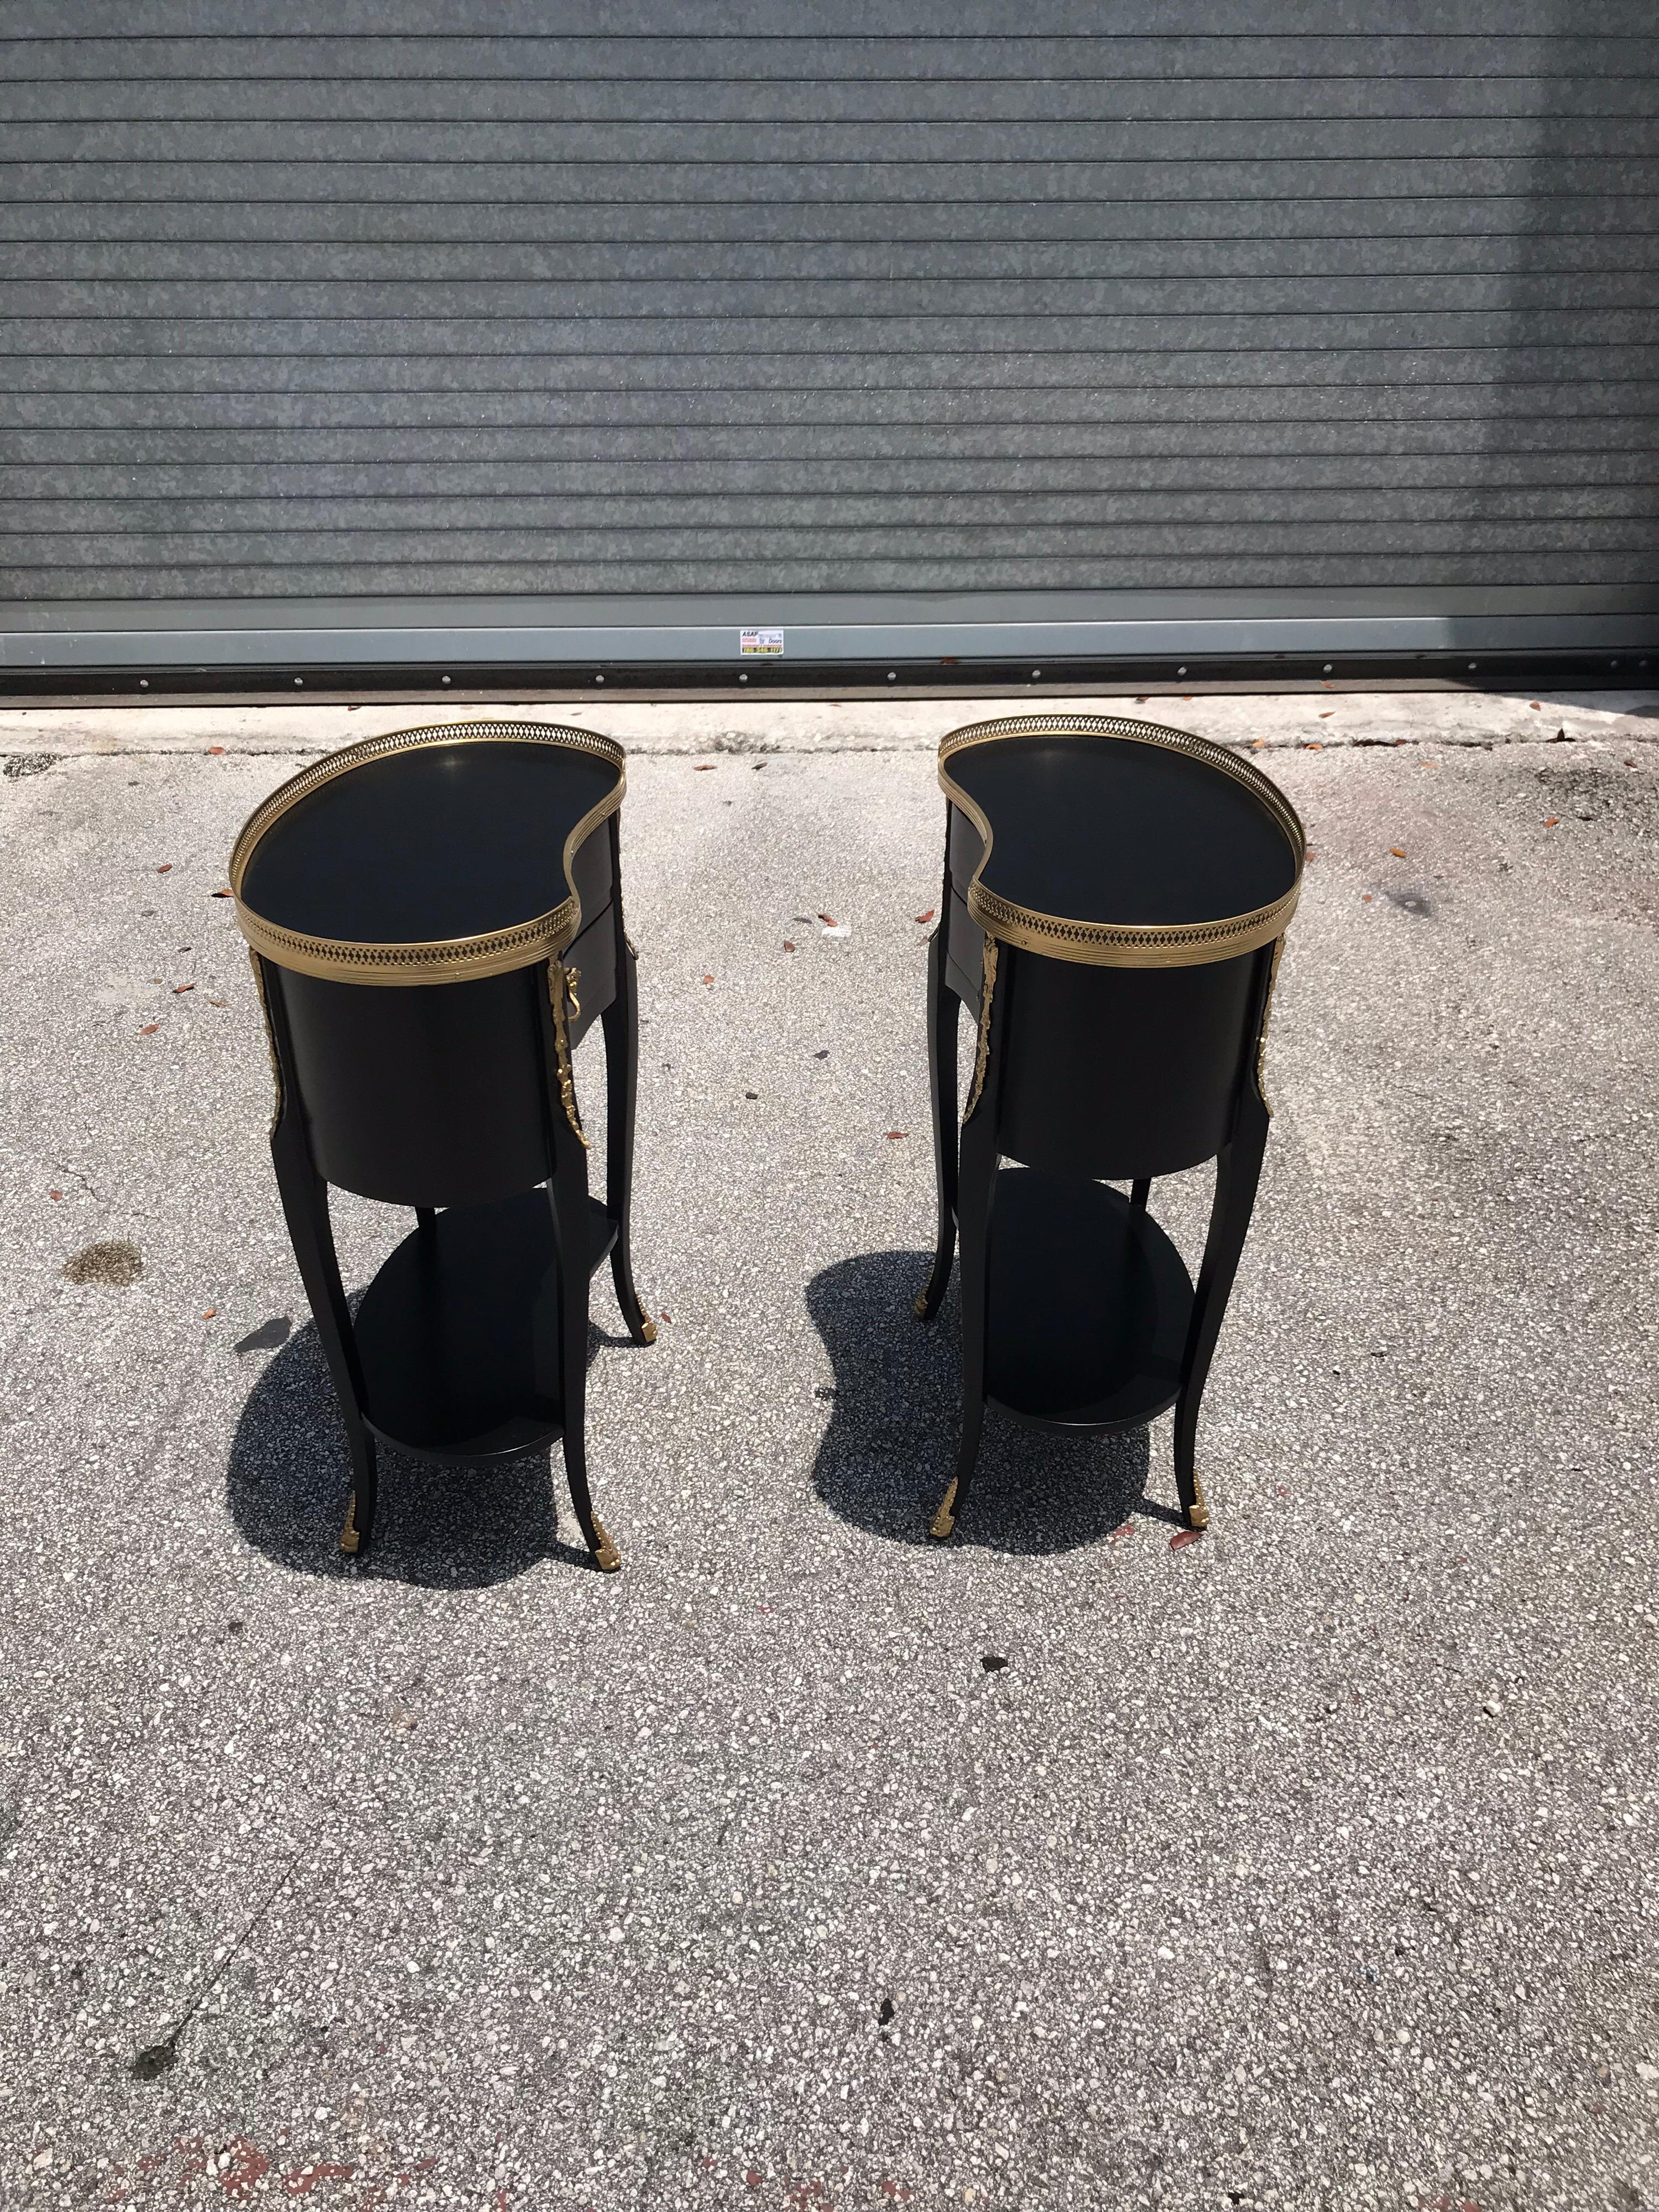 Beautiful pair of French louis xv side tables or accent table, 1920s, made of solid mahogany that have been ebonized and finished with a French polish, each table is with brass detail and features elegant finely cast brass hardware, two drawers and